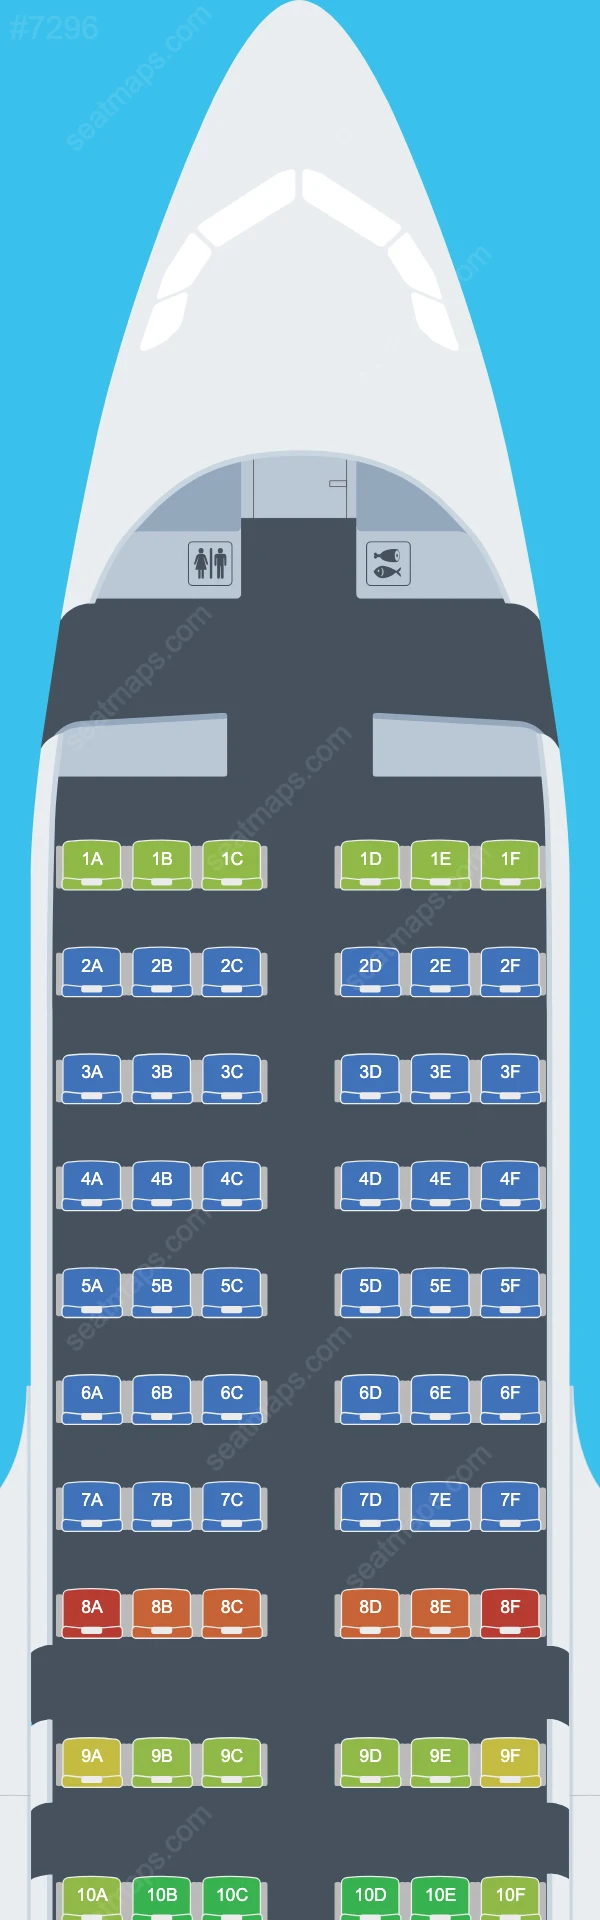 Eurowings Airbus A319 Seat Maps A319-100 V.1